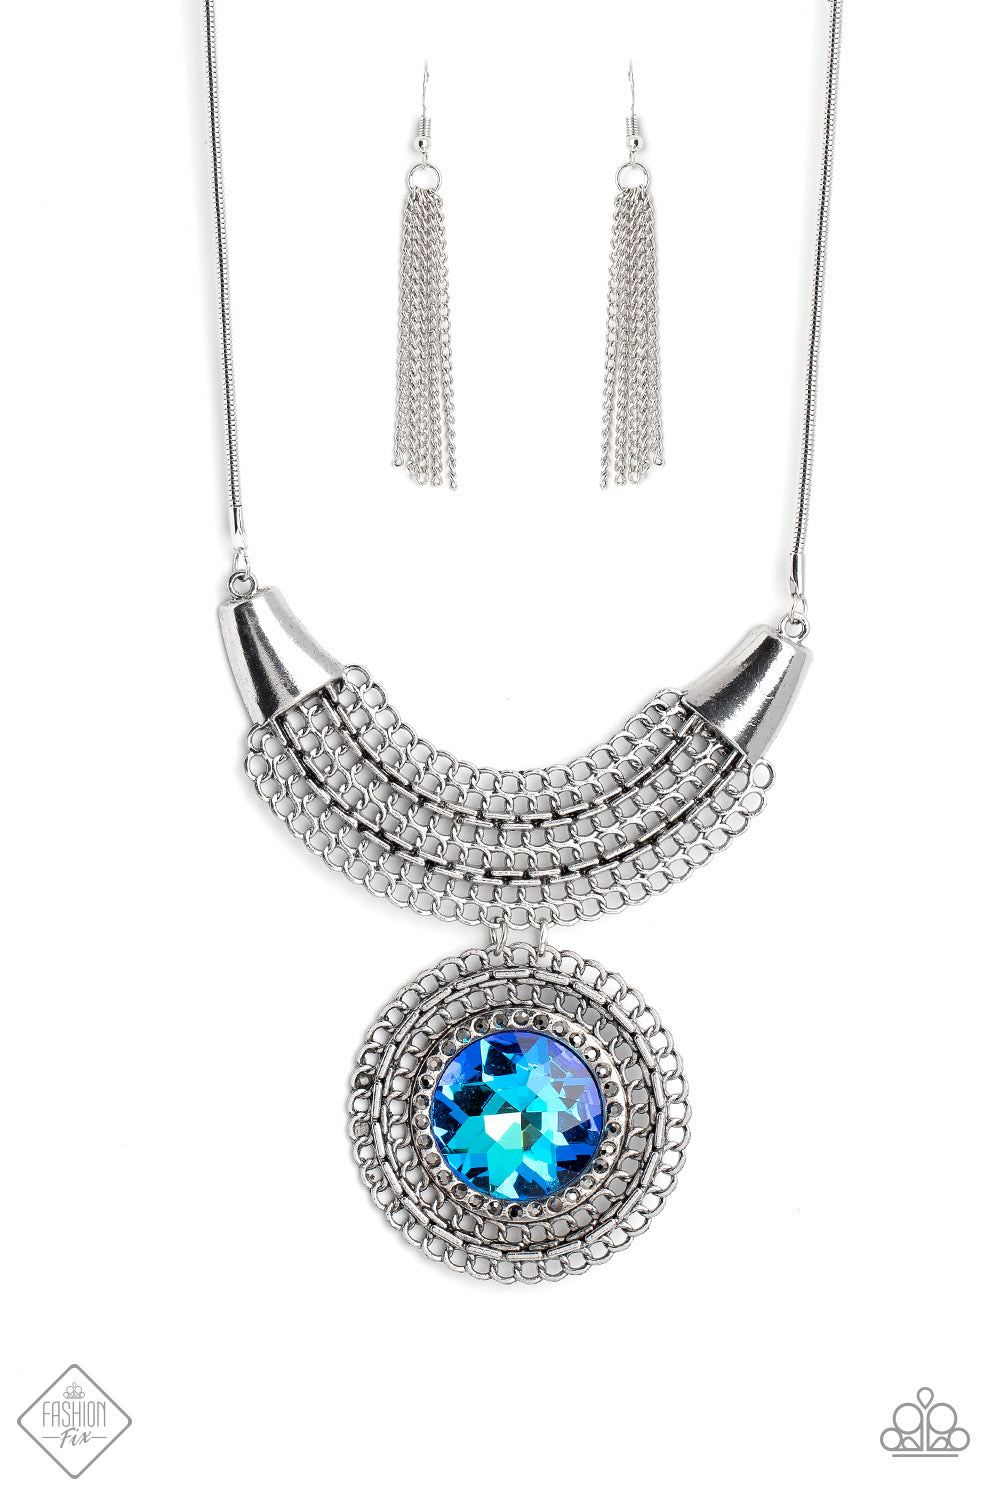 Excalibur Extravagance Paparazzi Accessories Necklace with Earrings